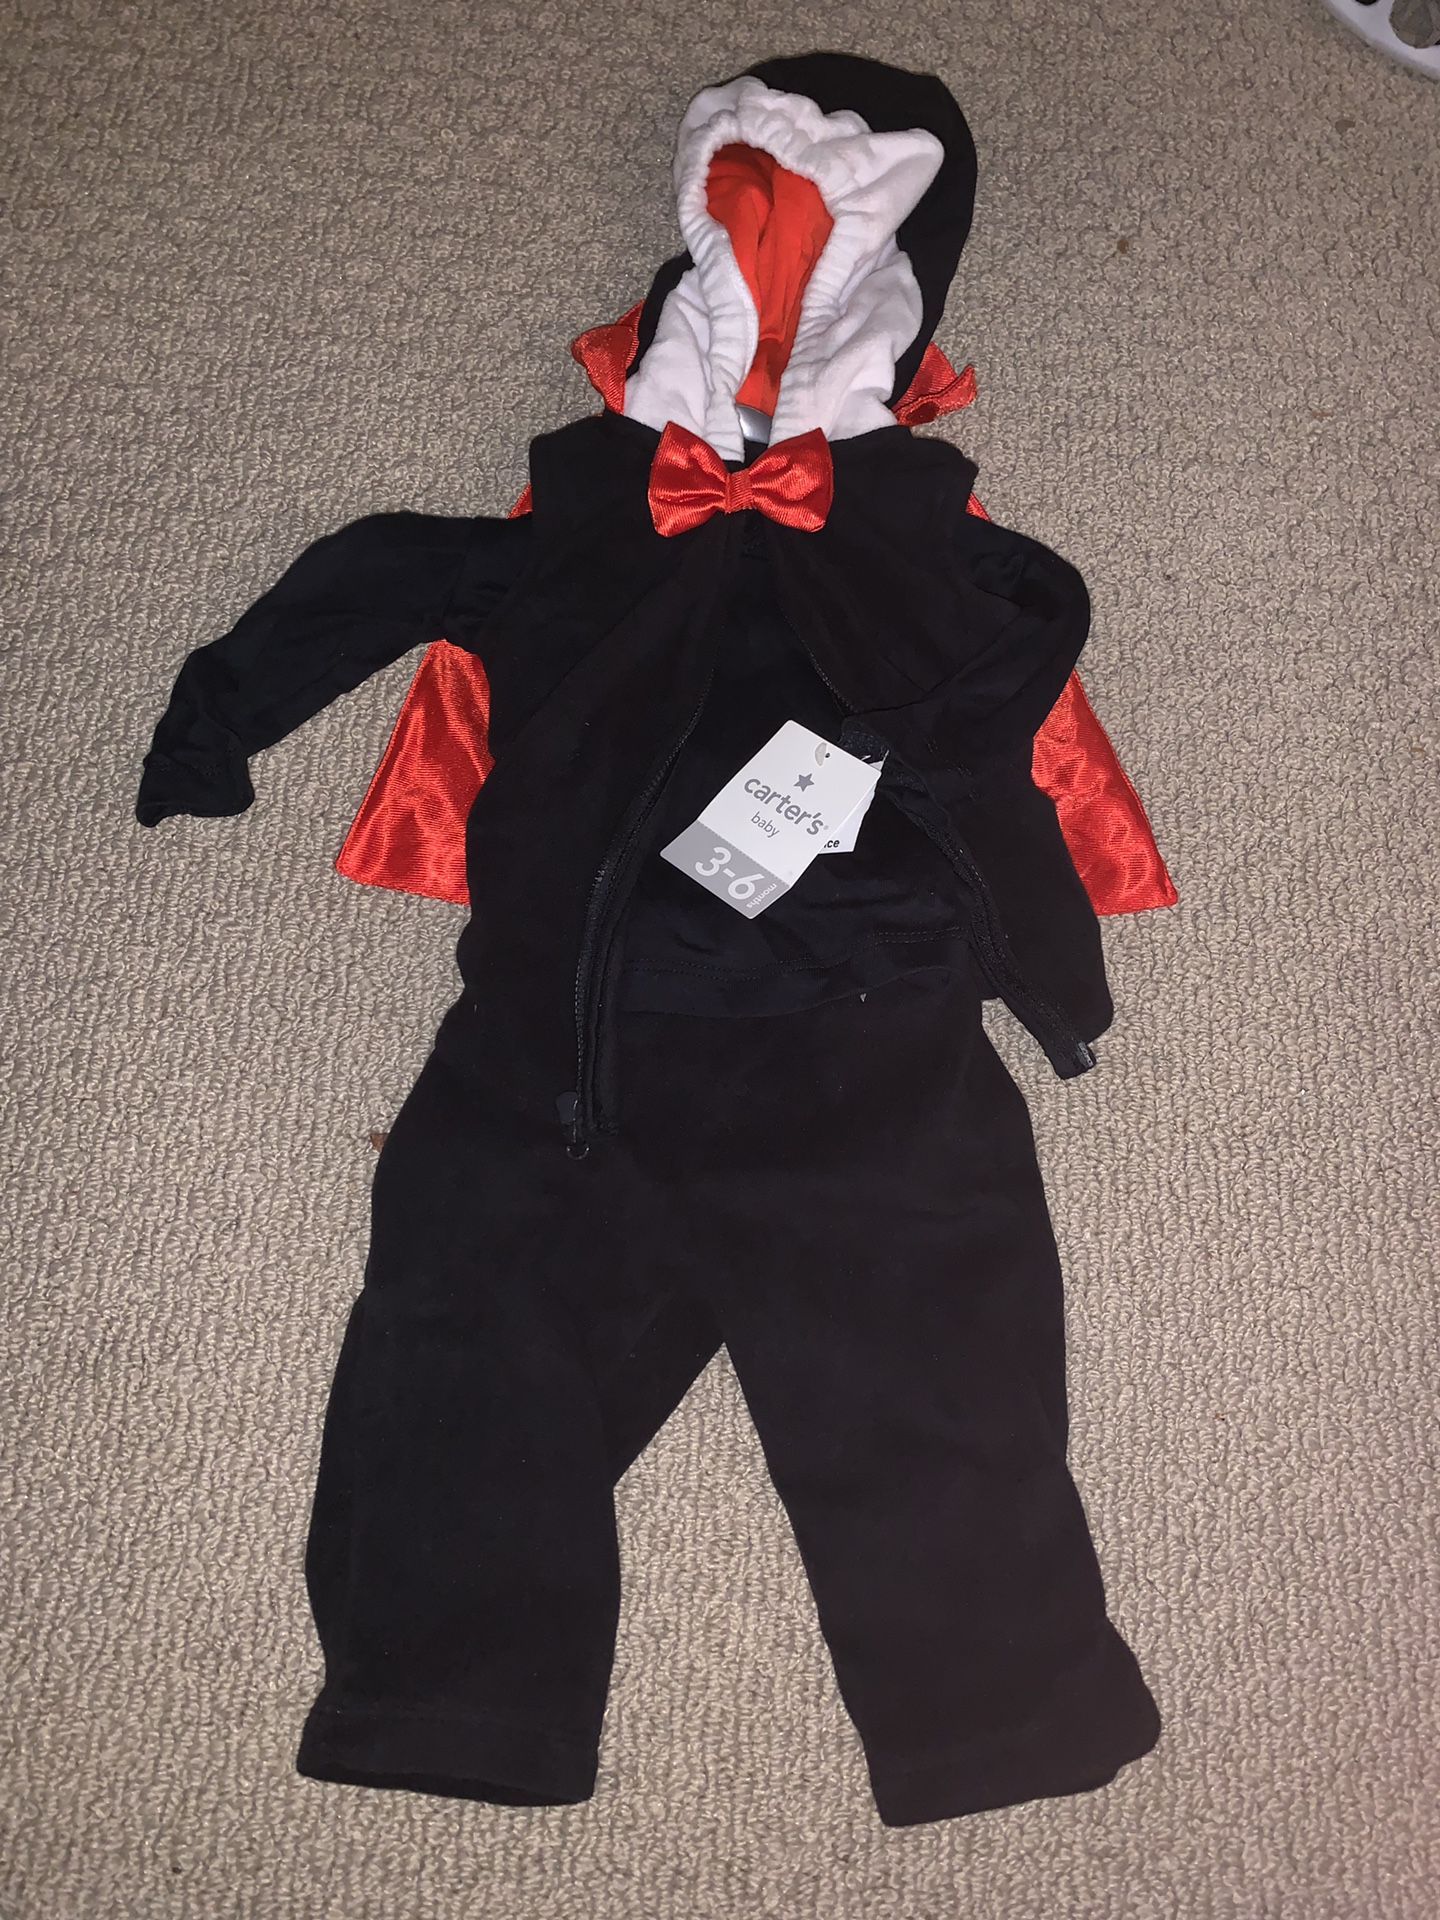 New 3 piece baby Carter outfit/costume. Looks like Dracula meets Dr Zeuss meets Penguin size 3-6 months